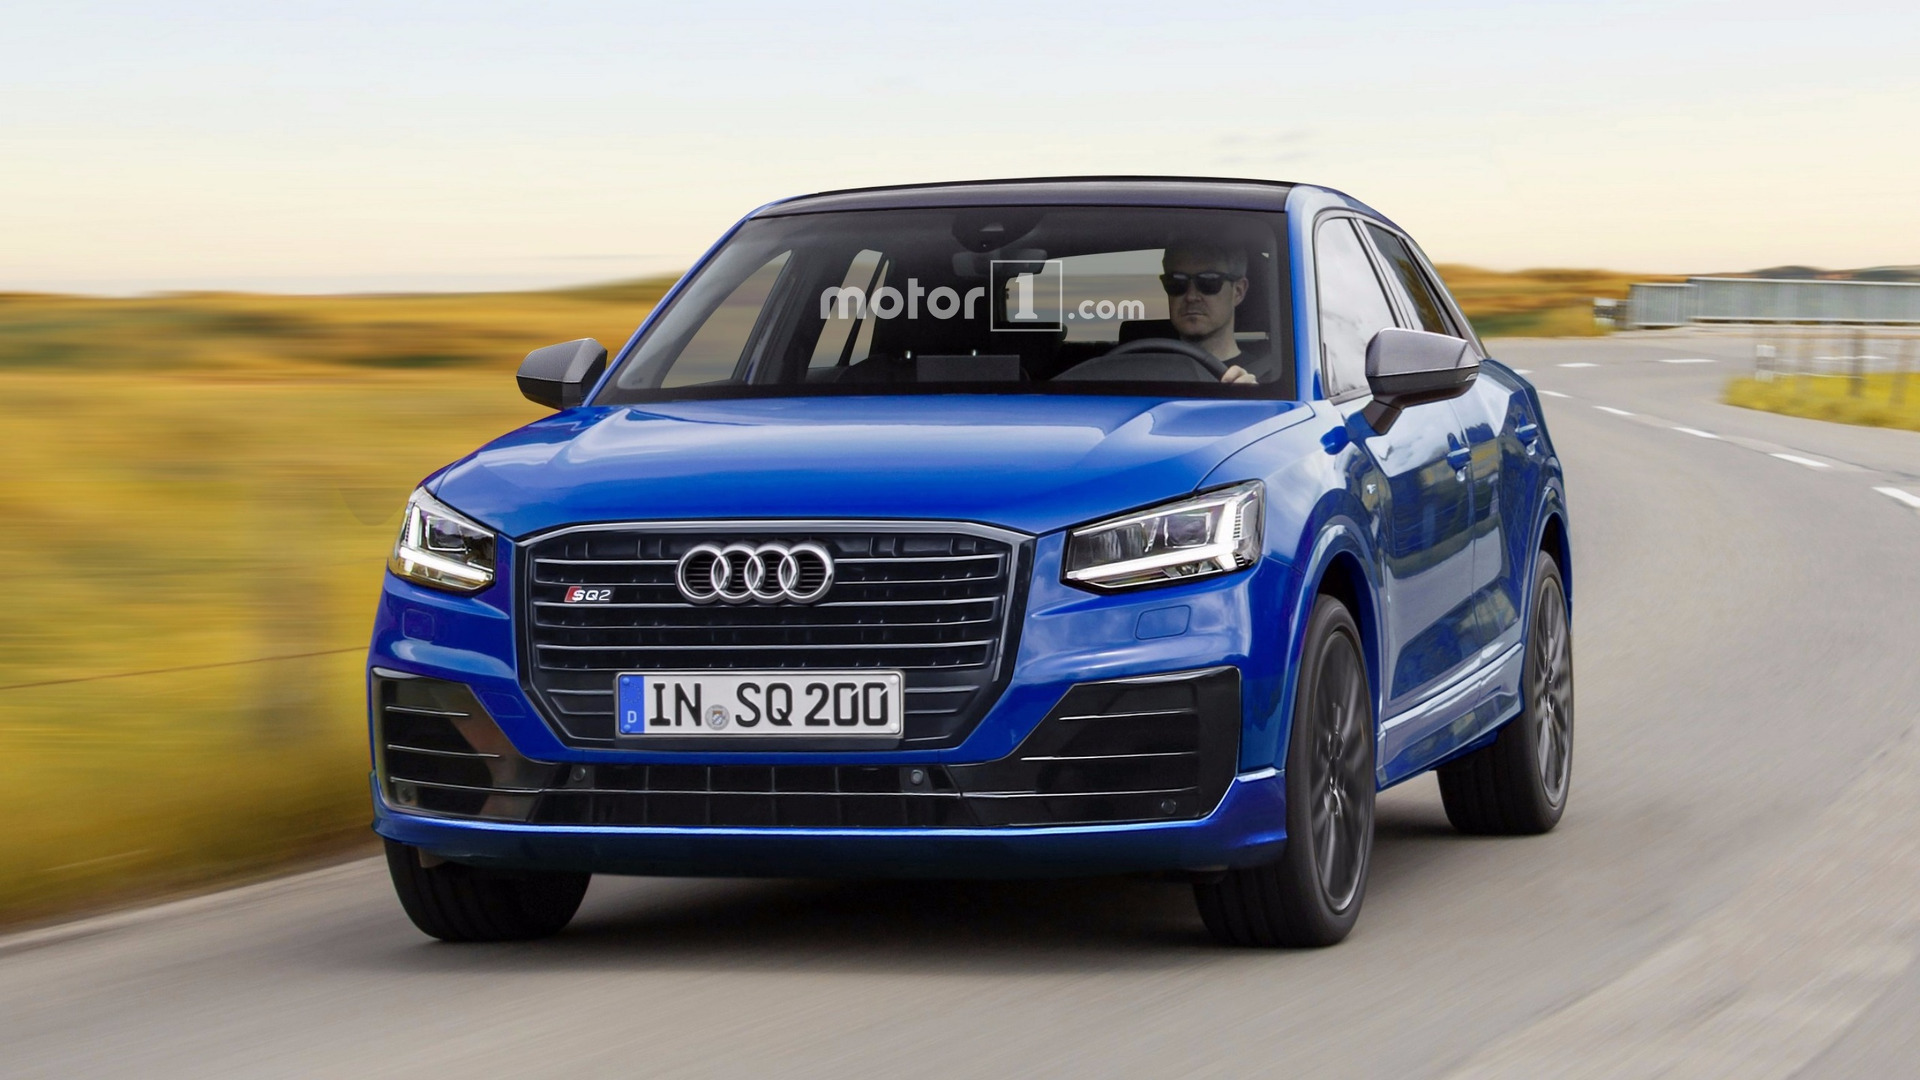 Audi Sq2 And Rs Q2 Renders Illustrate Plausible Future